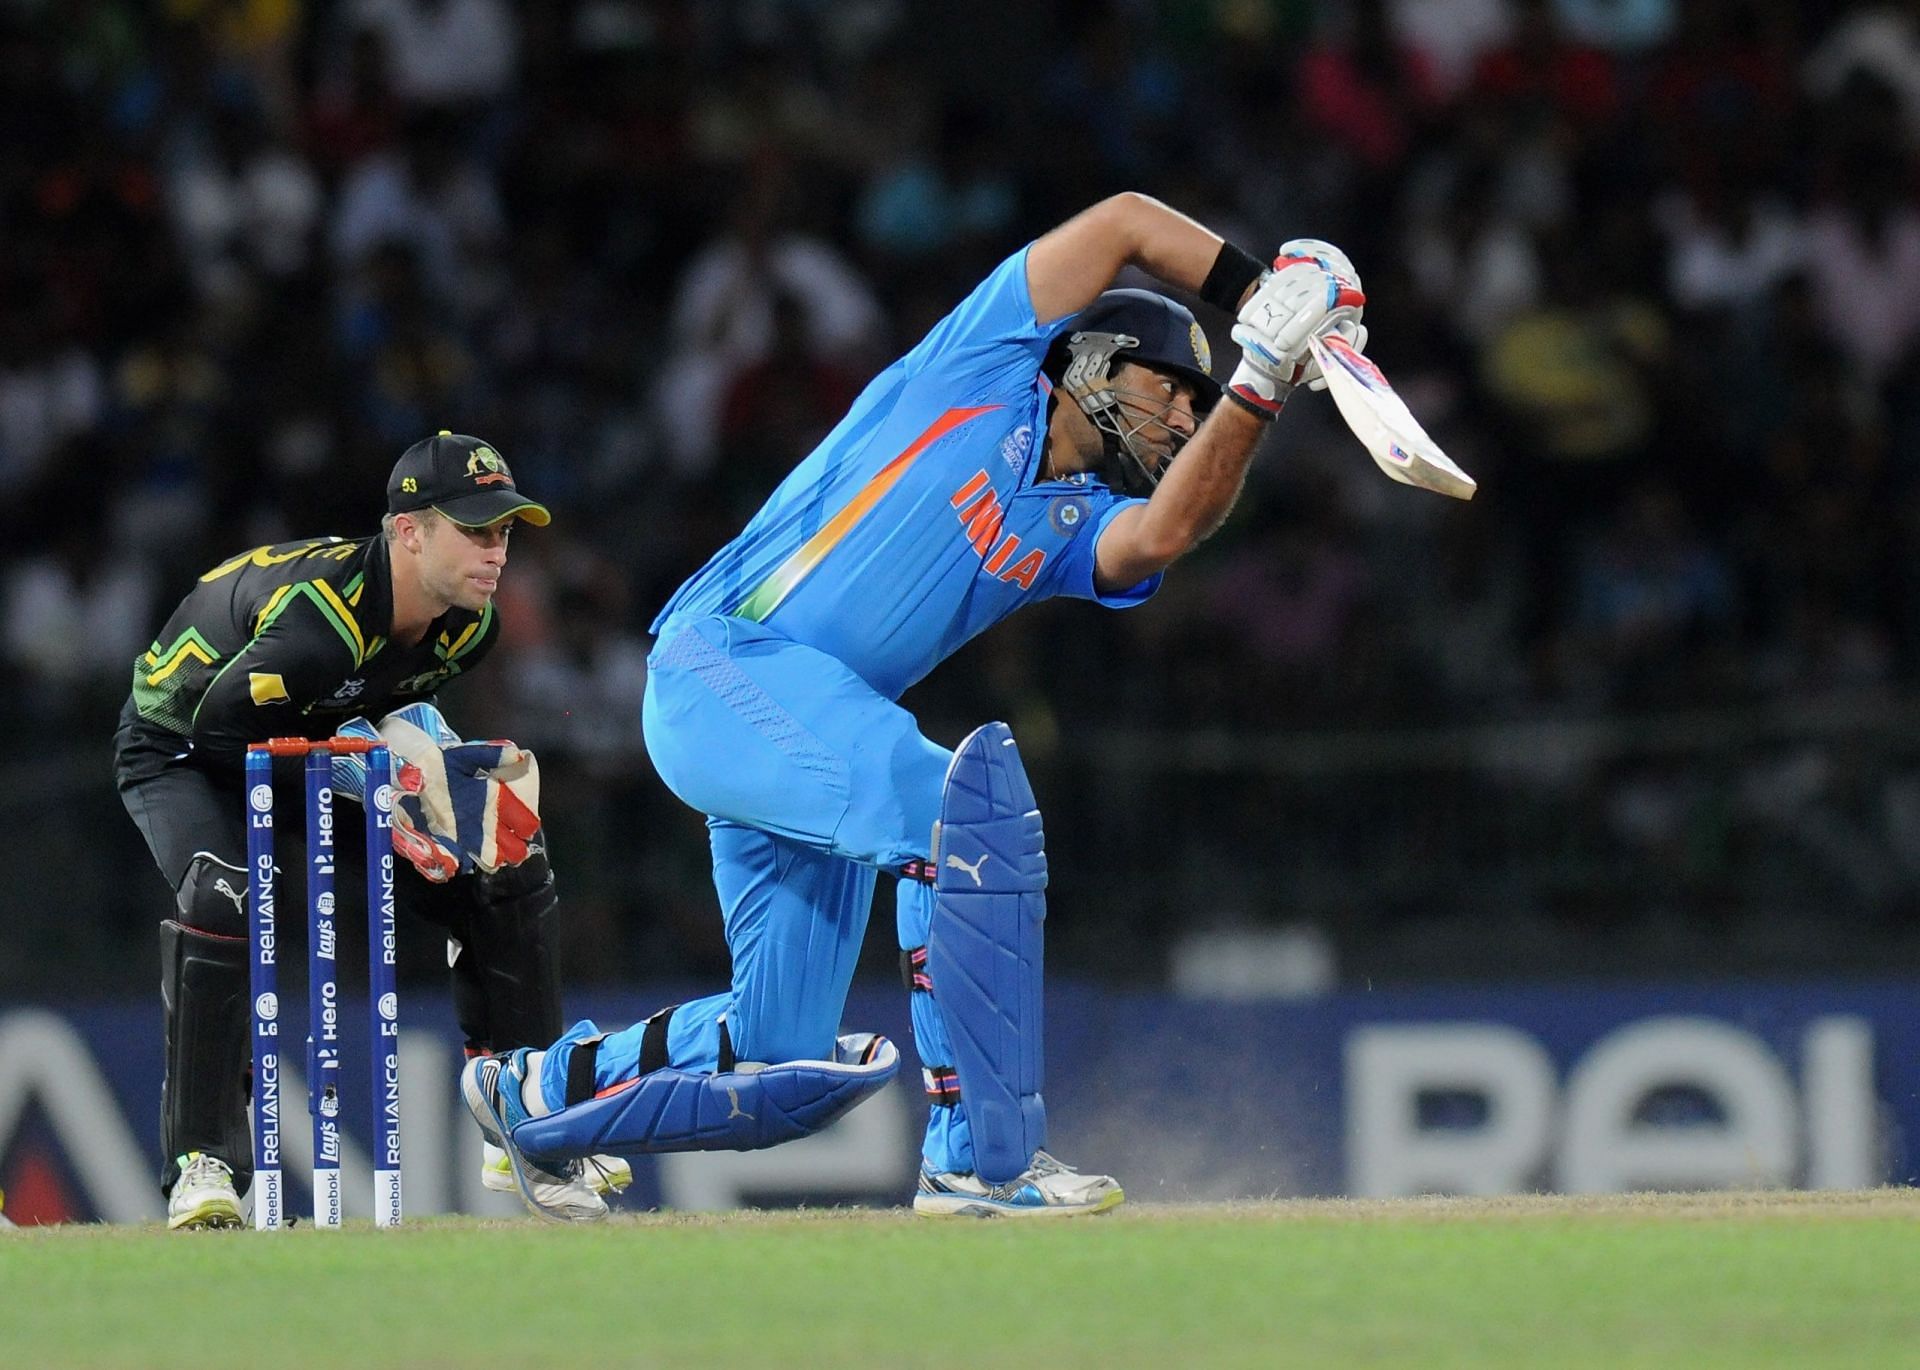 Yuvraj Singh scored an unbeaten 77 on his comeback after his recovery from cancer. Pic: Getty Images